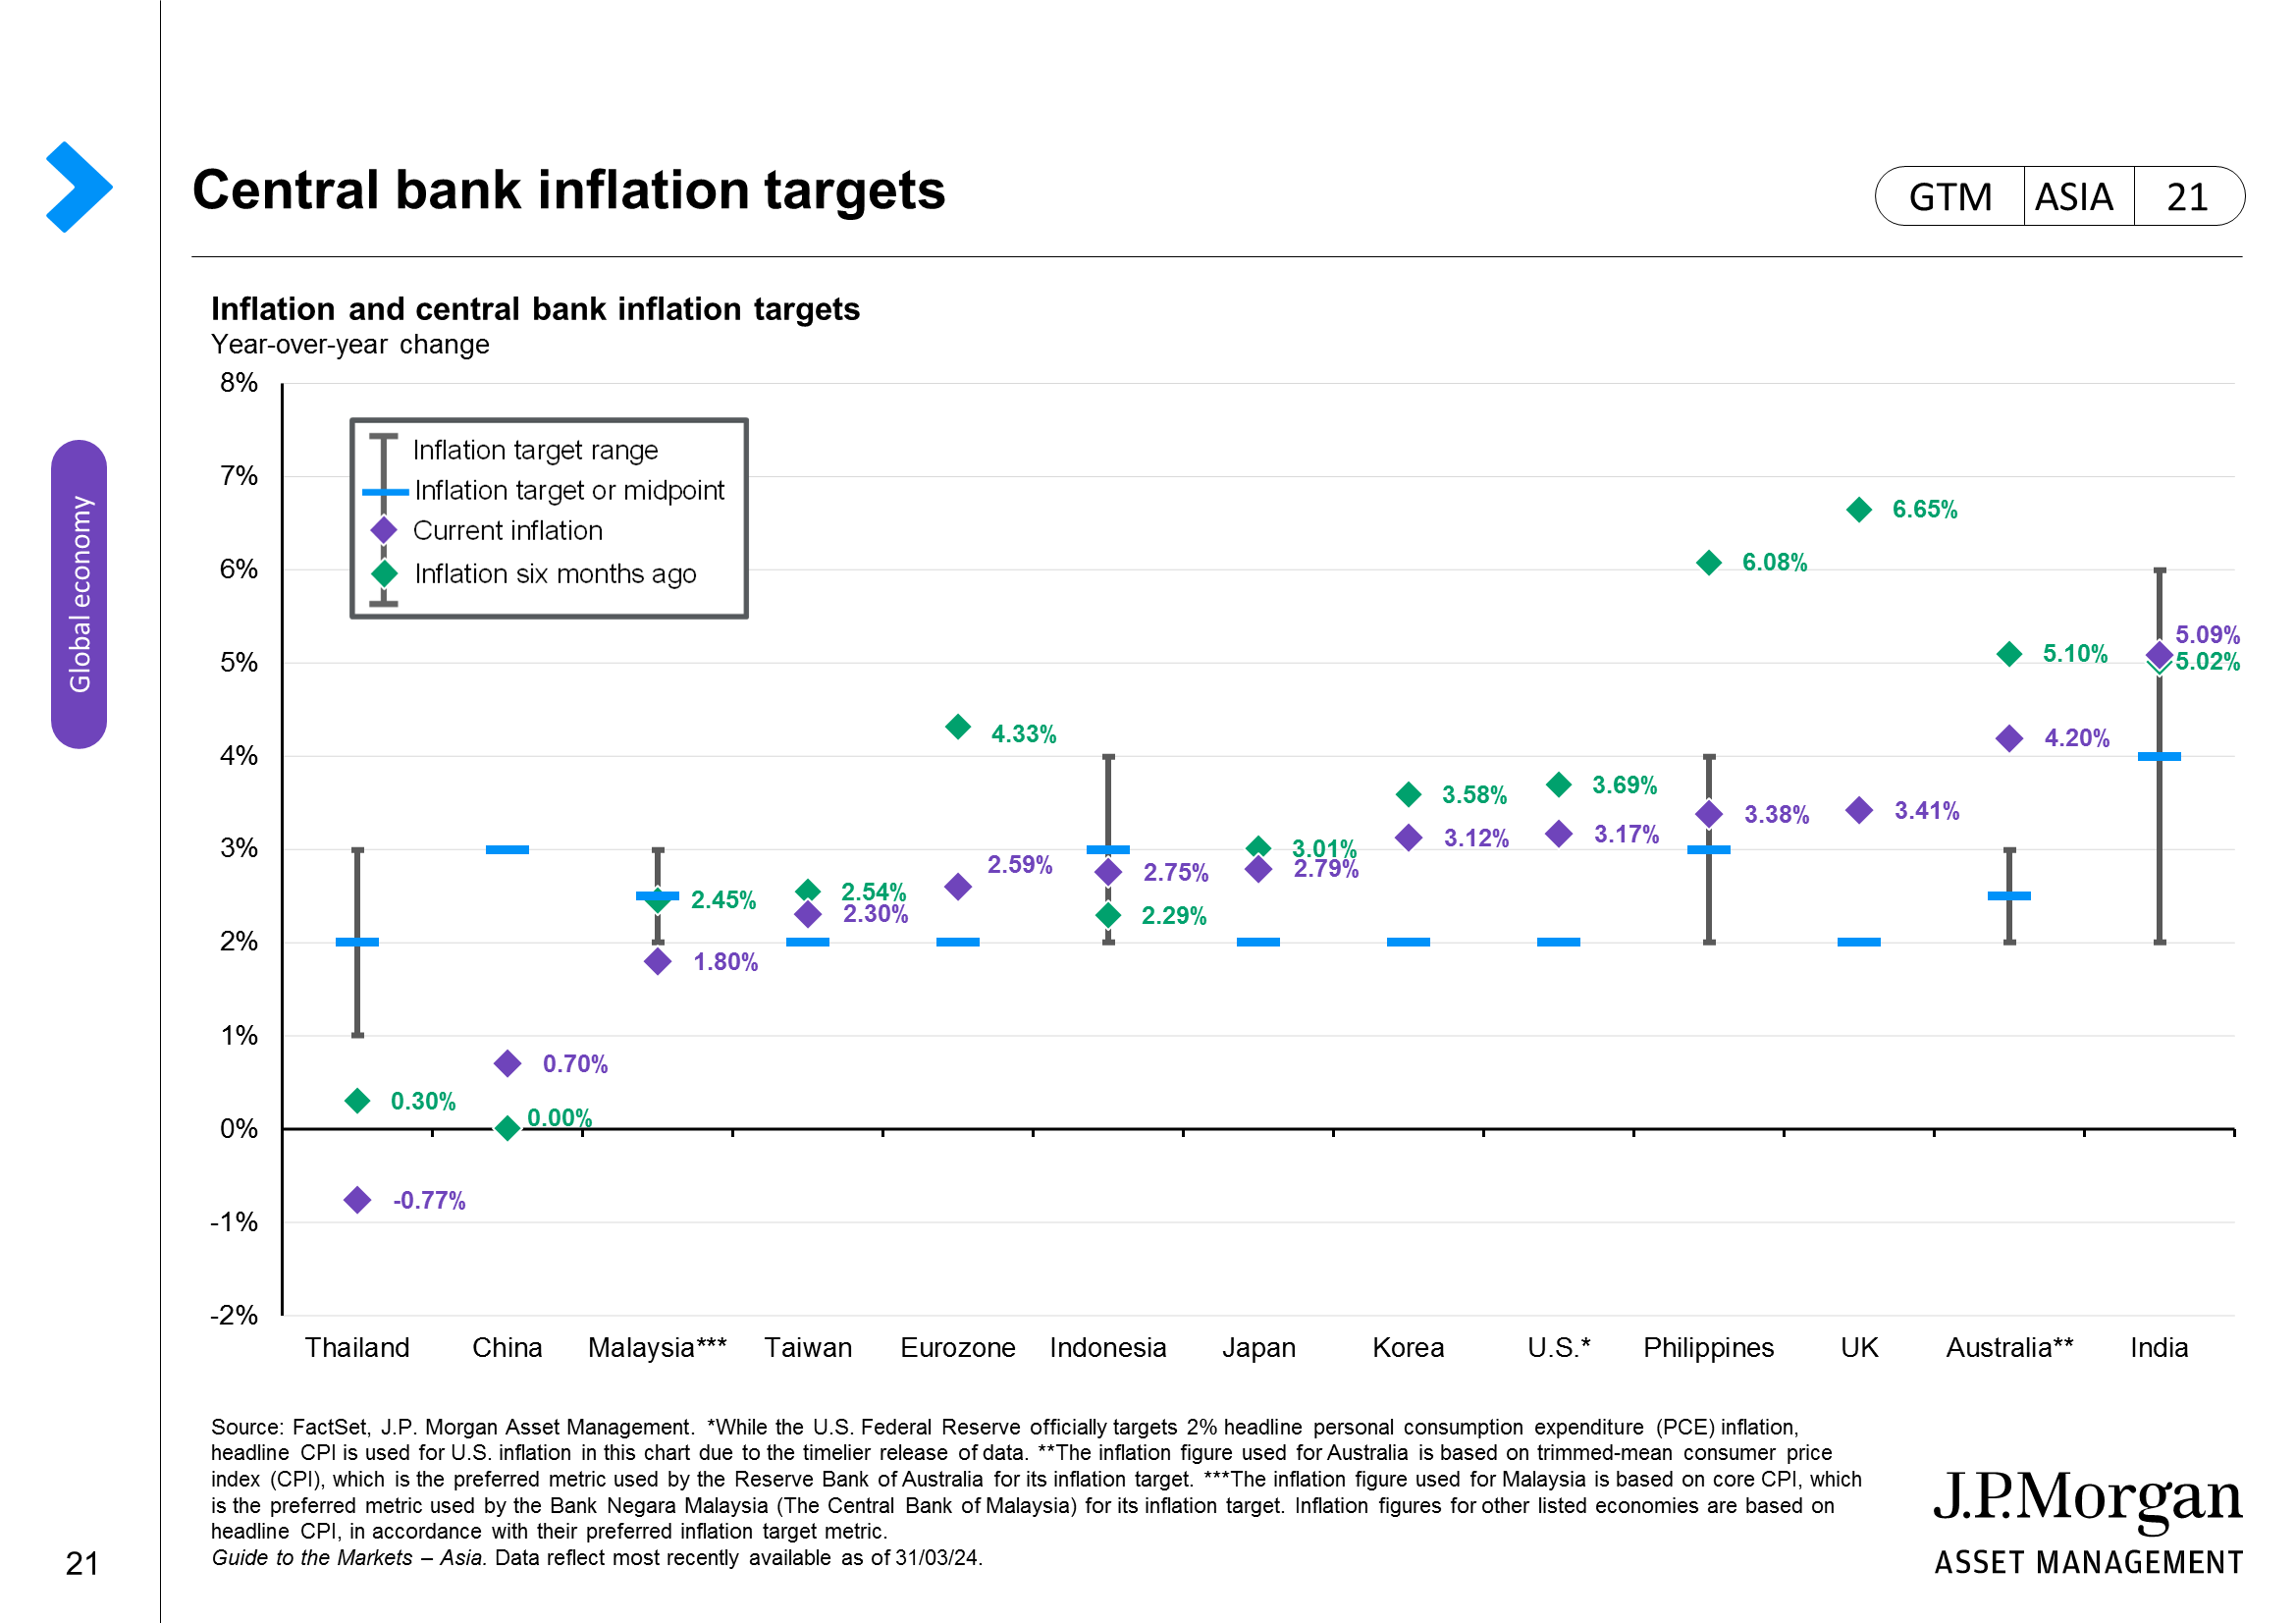 Global central bank policy rate changes